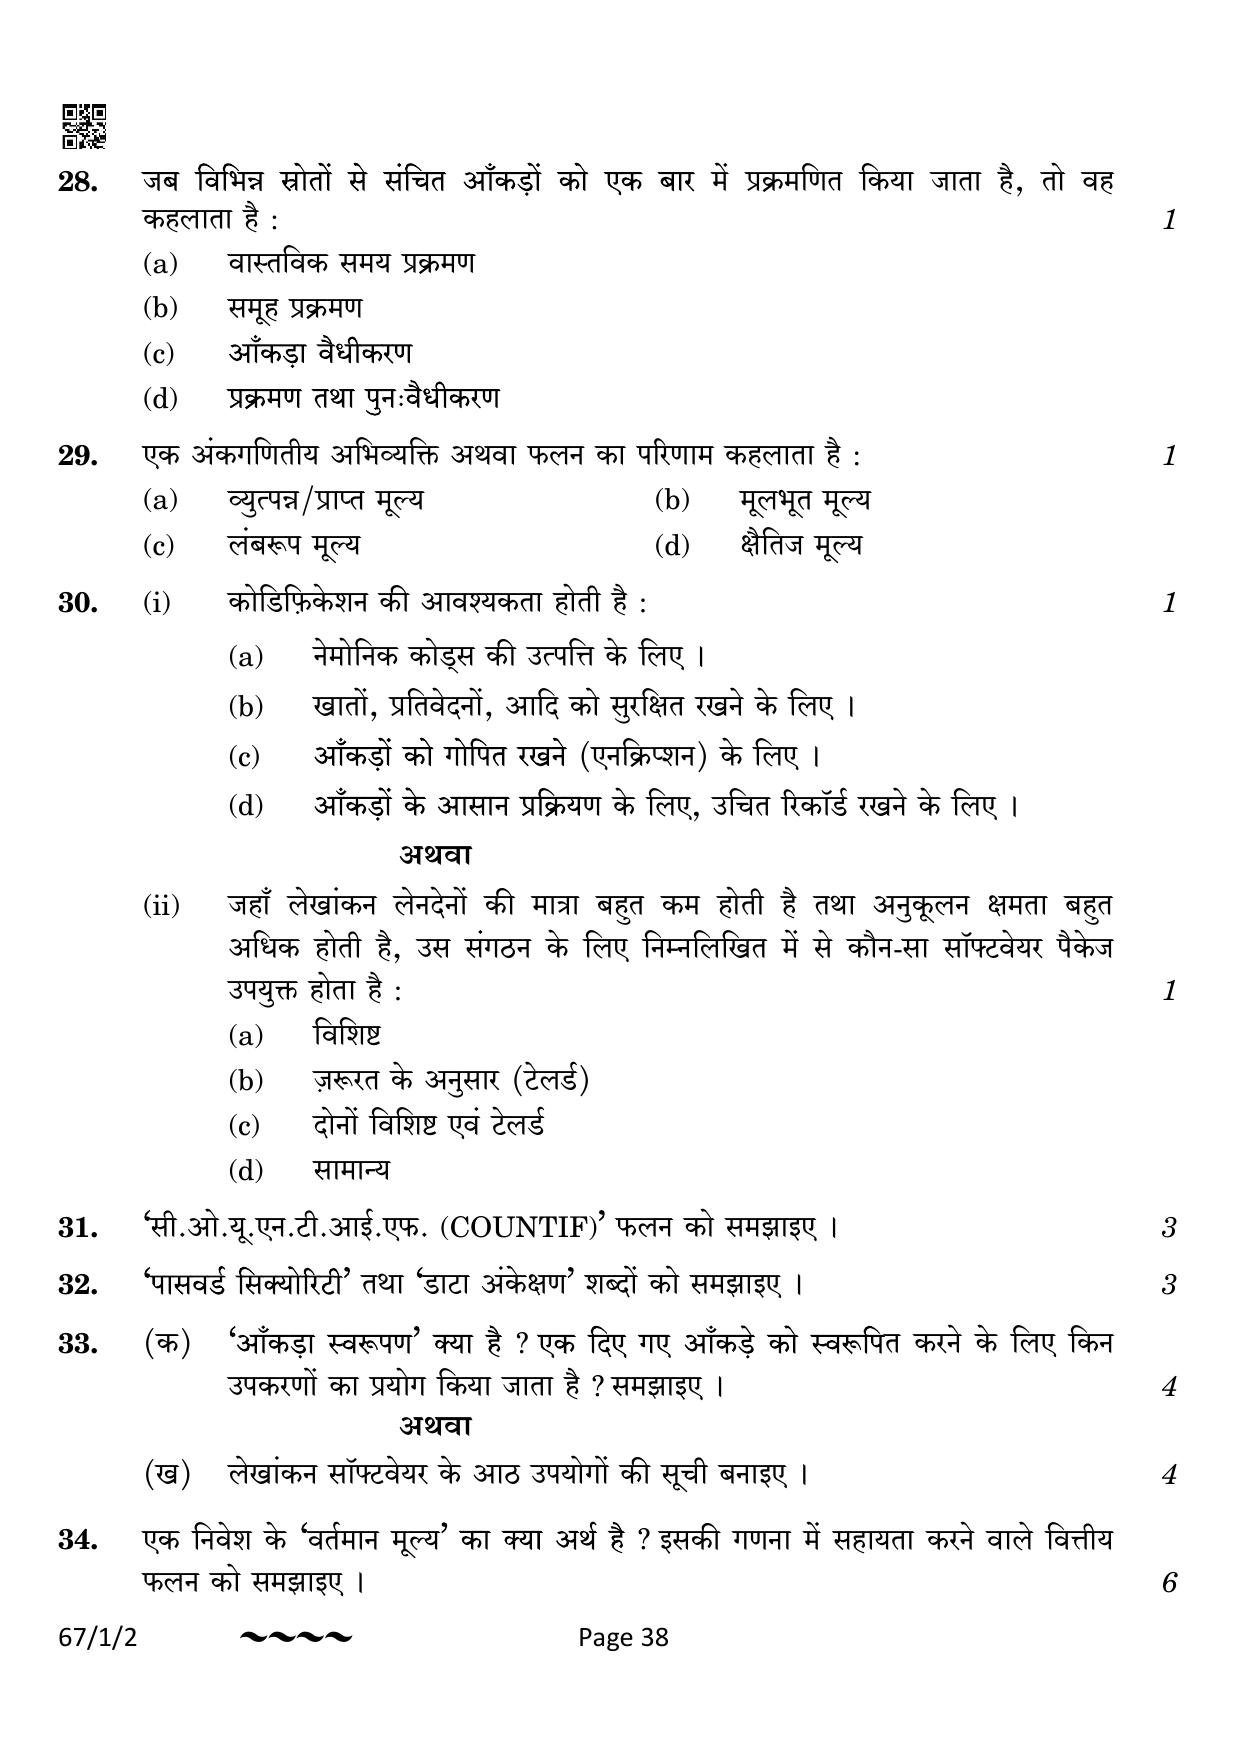 CBSE Class 12 67-1-2 Accountancy 2023 Question Paper - Page 38